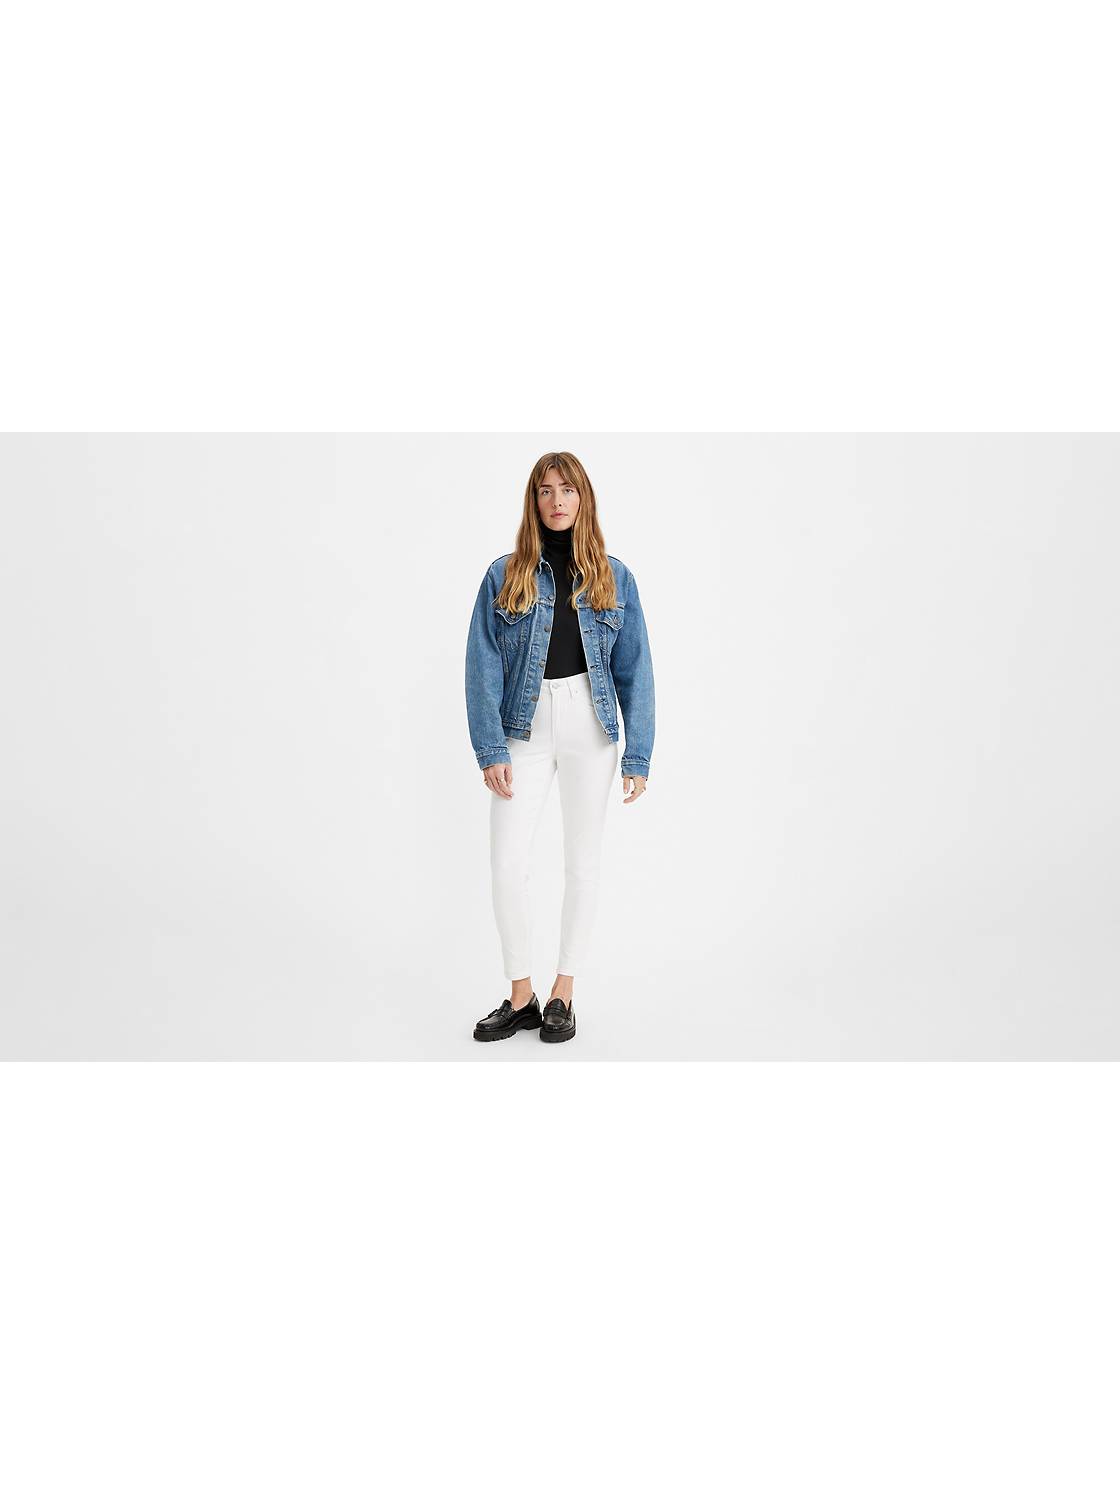 A tientas Acercarse líder Tall Women's Jeans: Women's Tall Skinny Jeans & More | Levi's® US